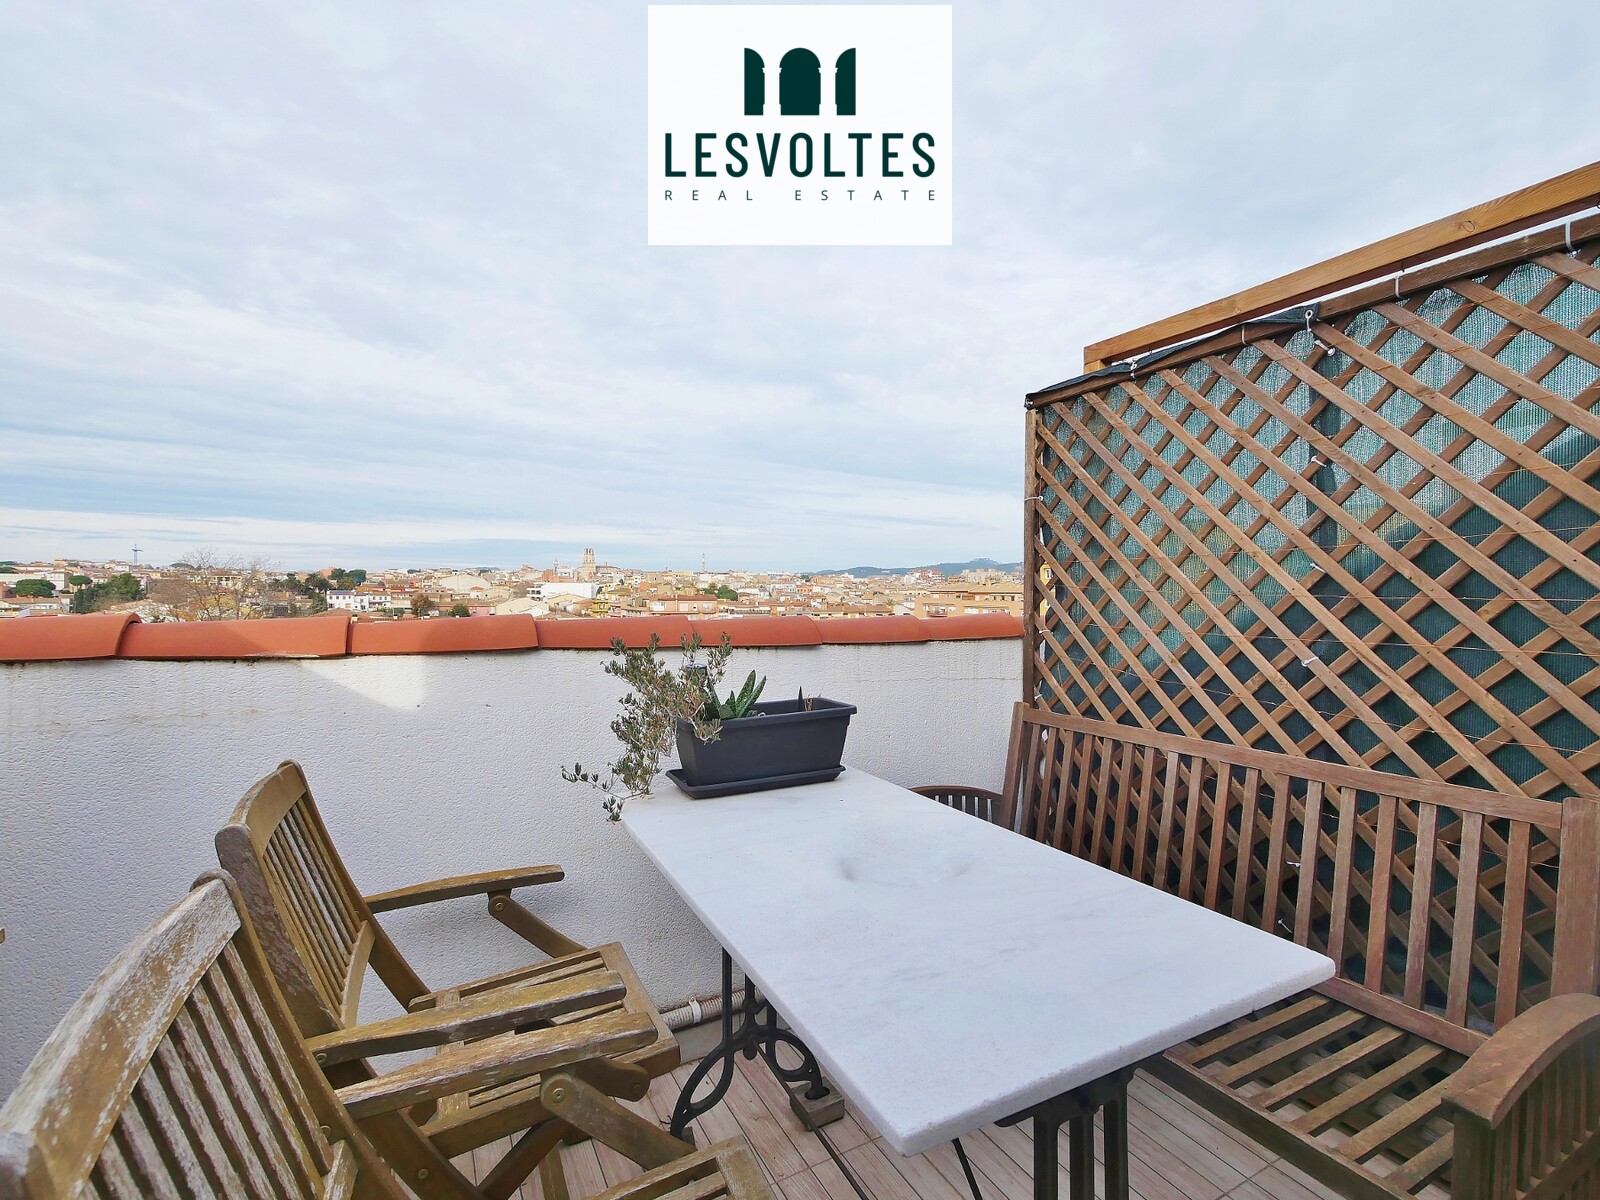 100 M2 DUPLEX APARTMENT WITH TERRACE AND PARKING FOR SALE IN PALAFRUGELL